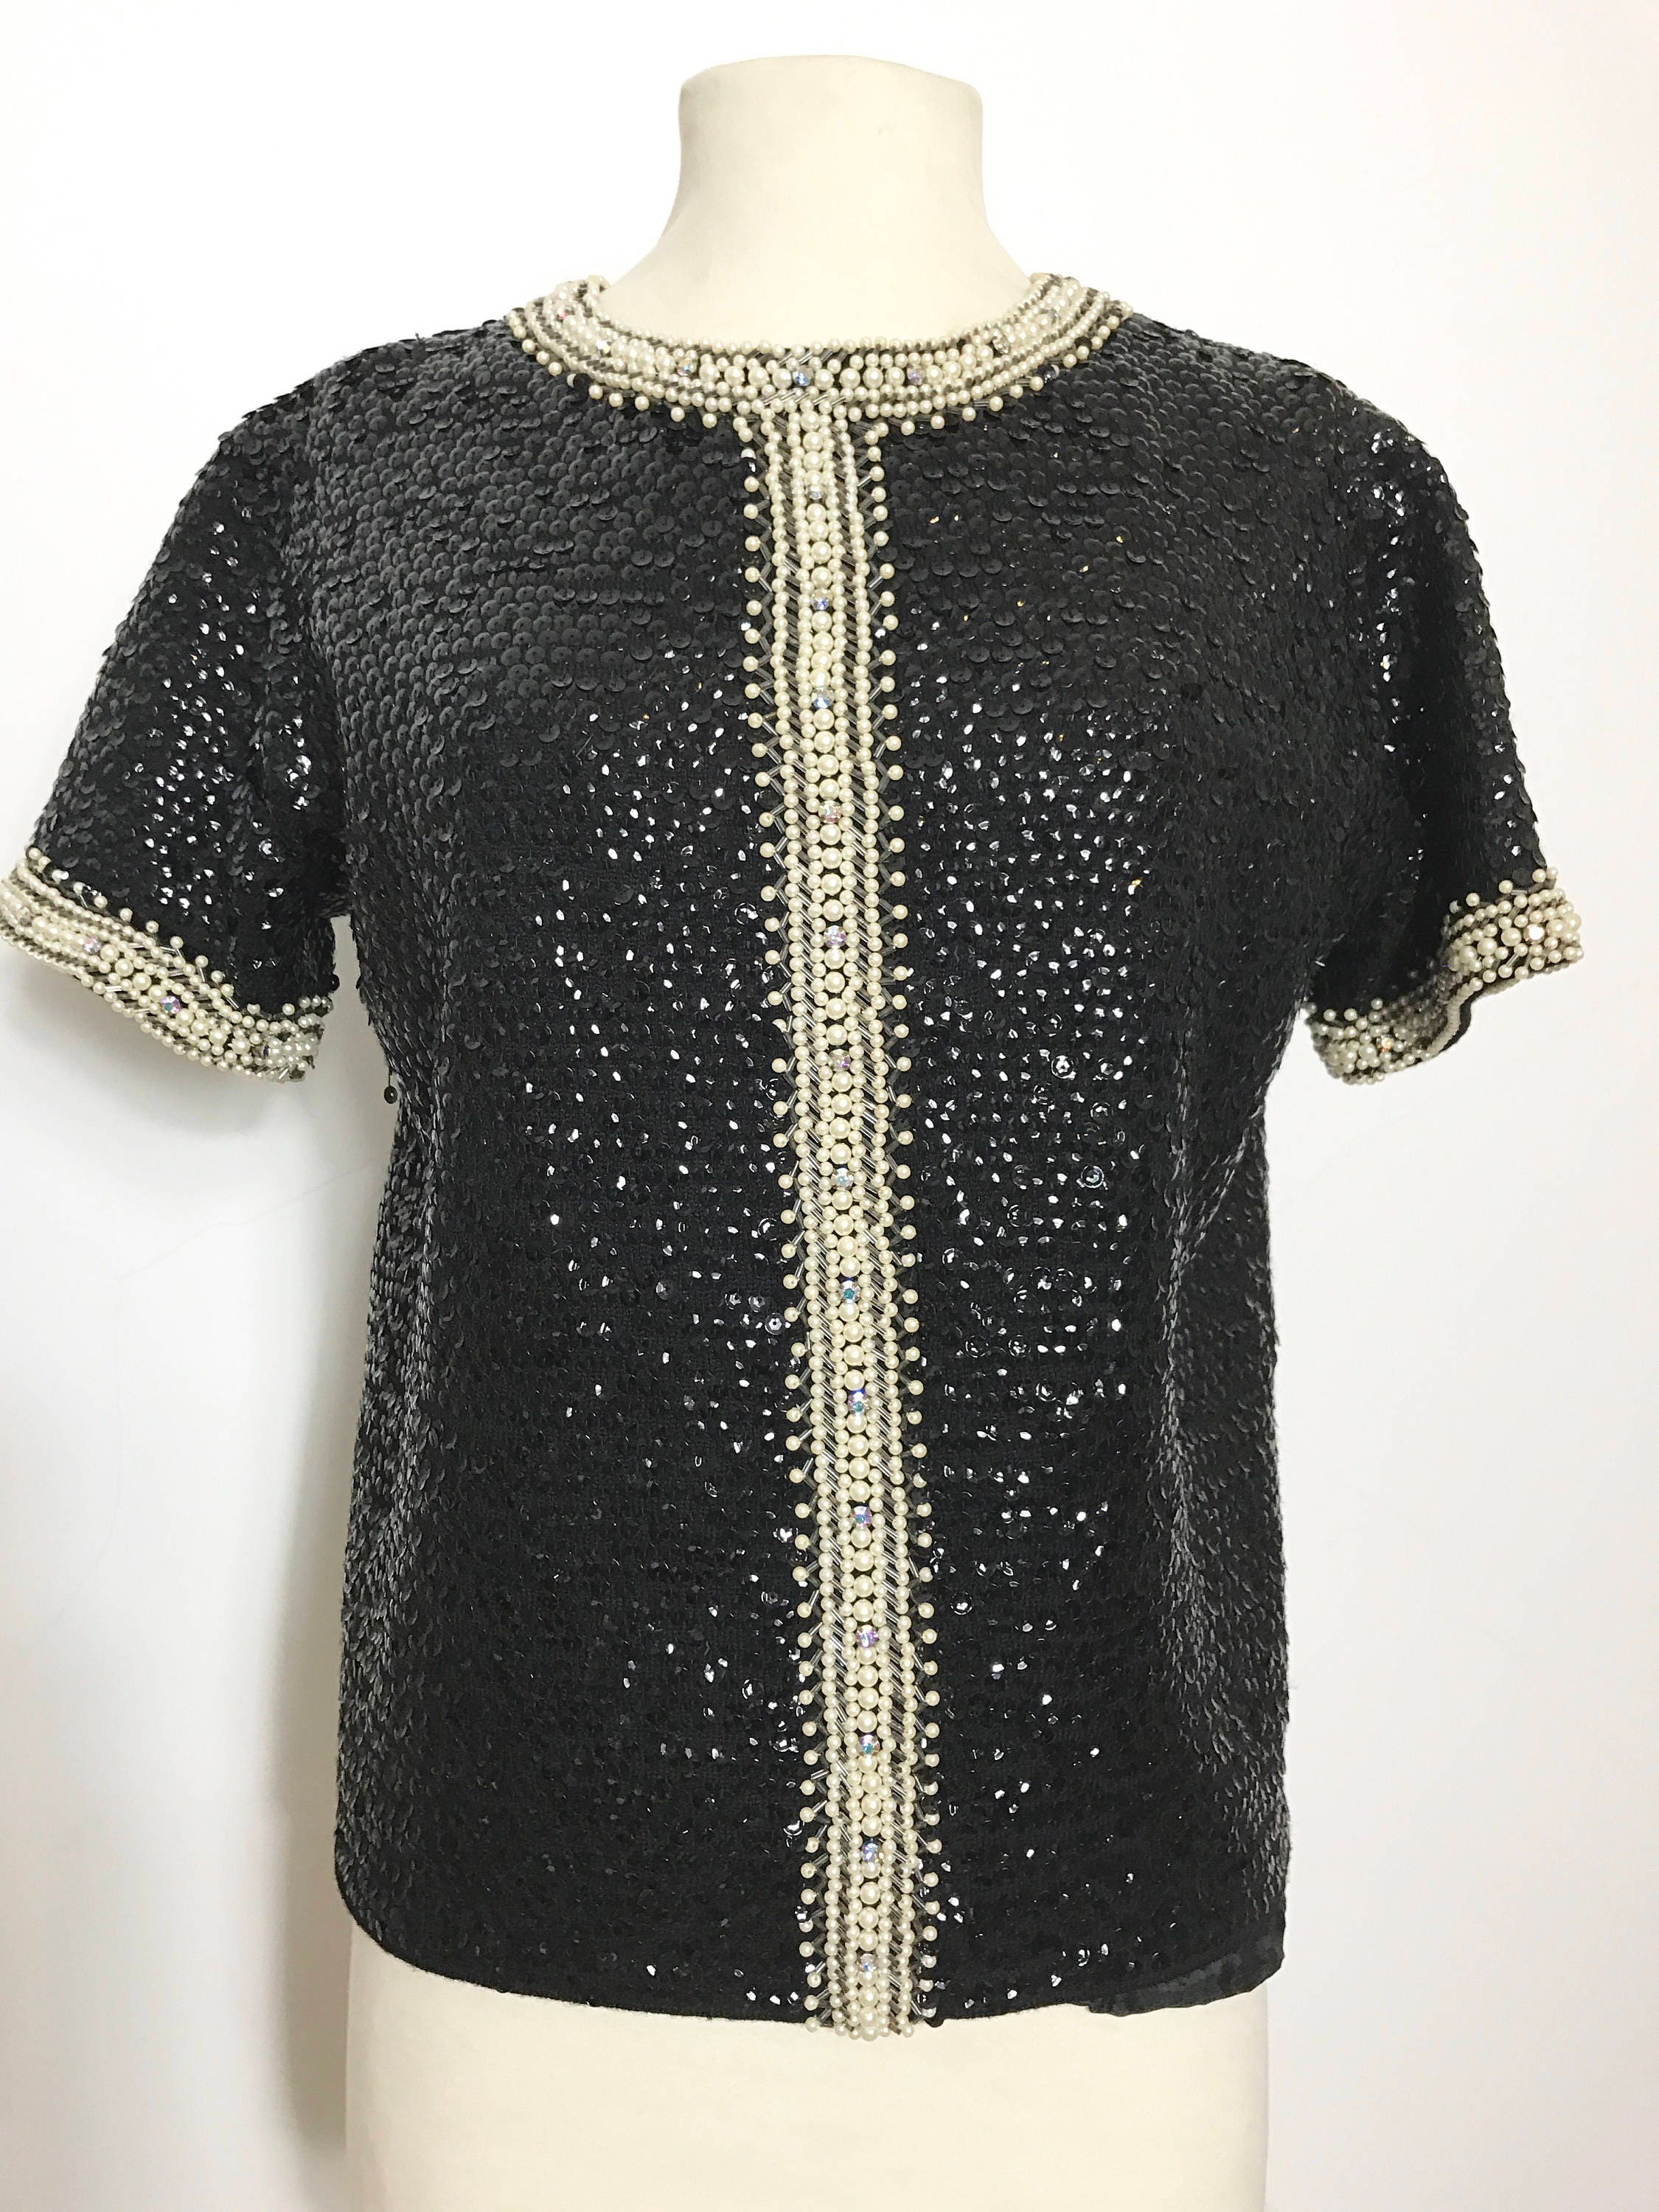 REDUCED Fabulous 1960s Black Sequin and White Beaded Top